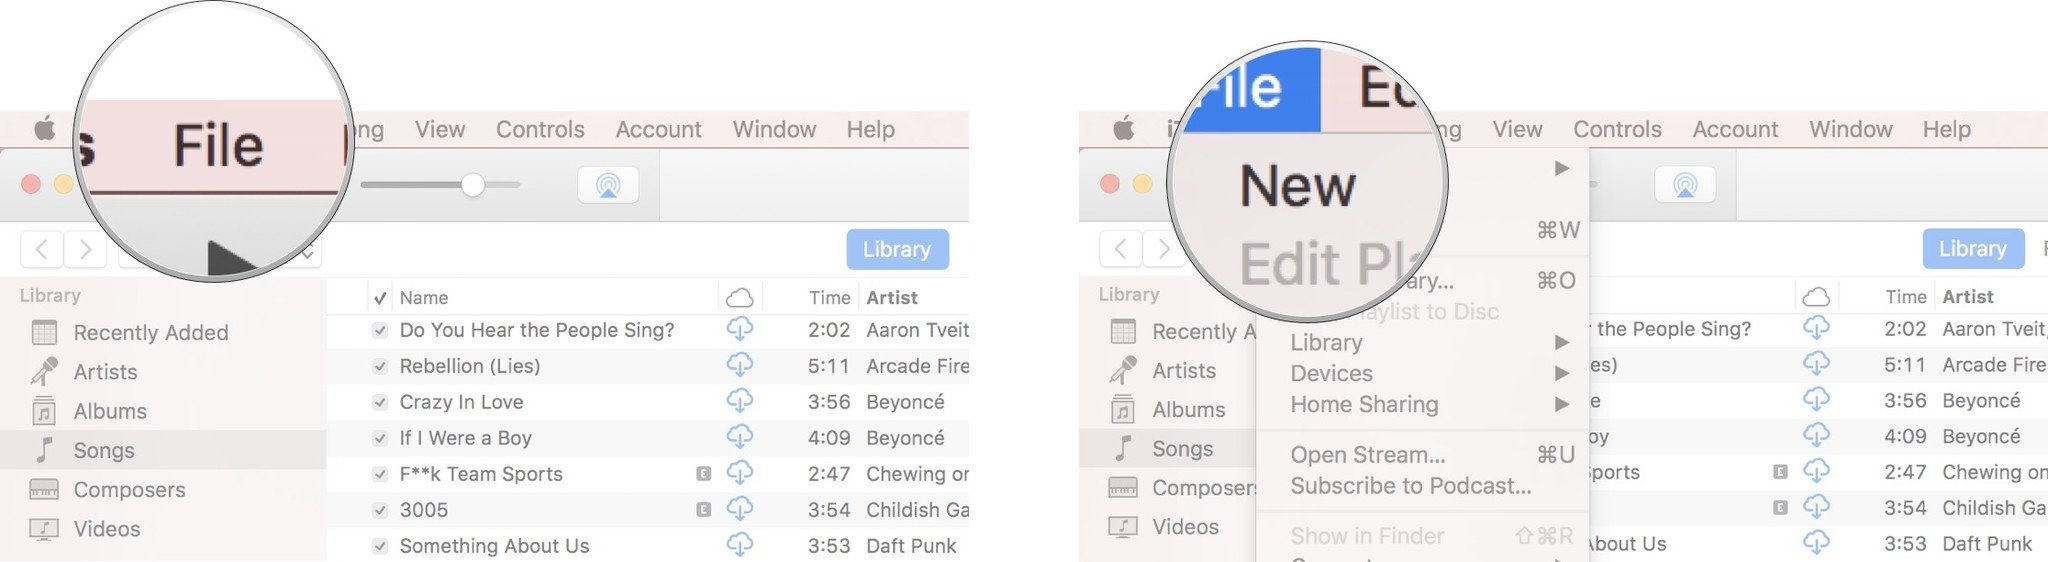 Launch iTunes on your Mac, click File in the top menu button, and then hover your cursor over New.